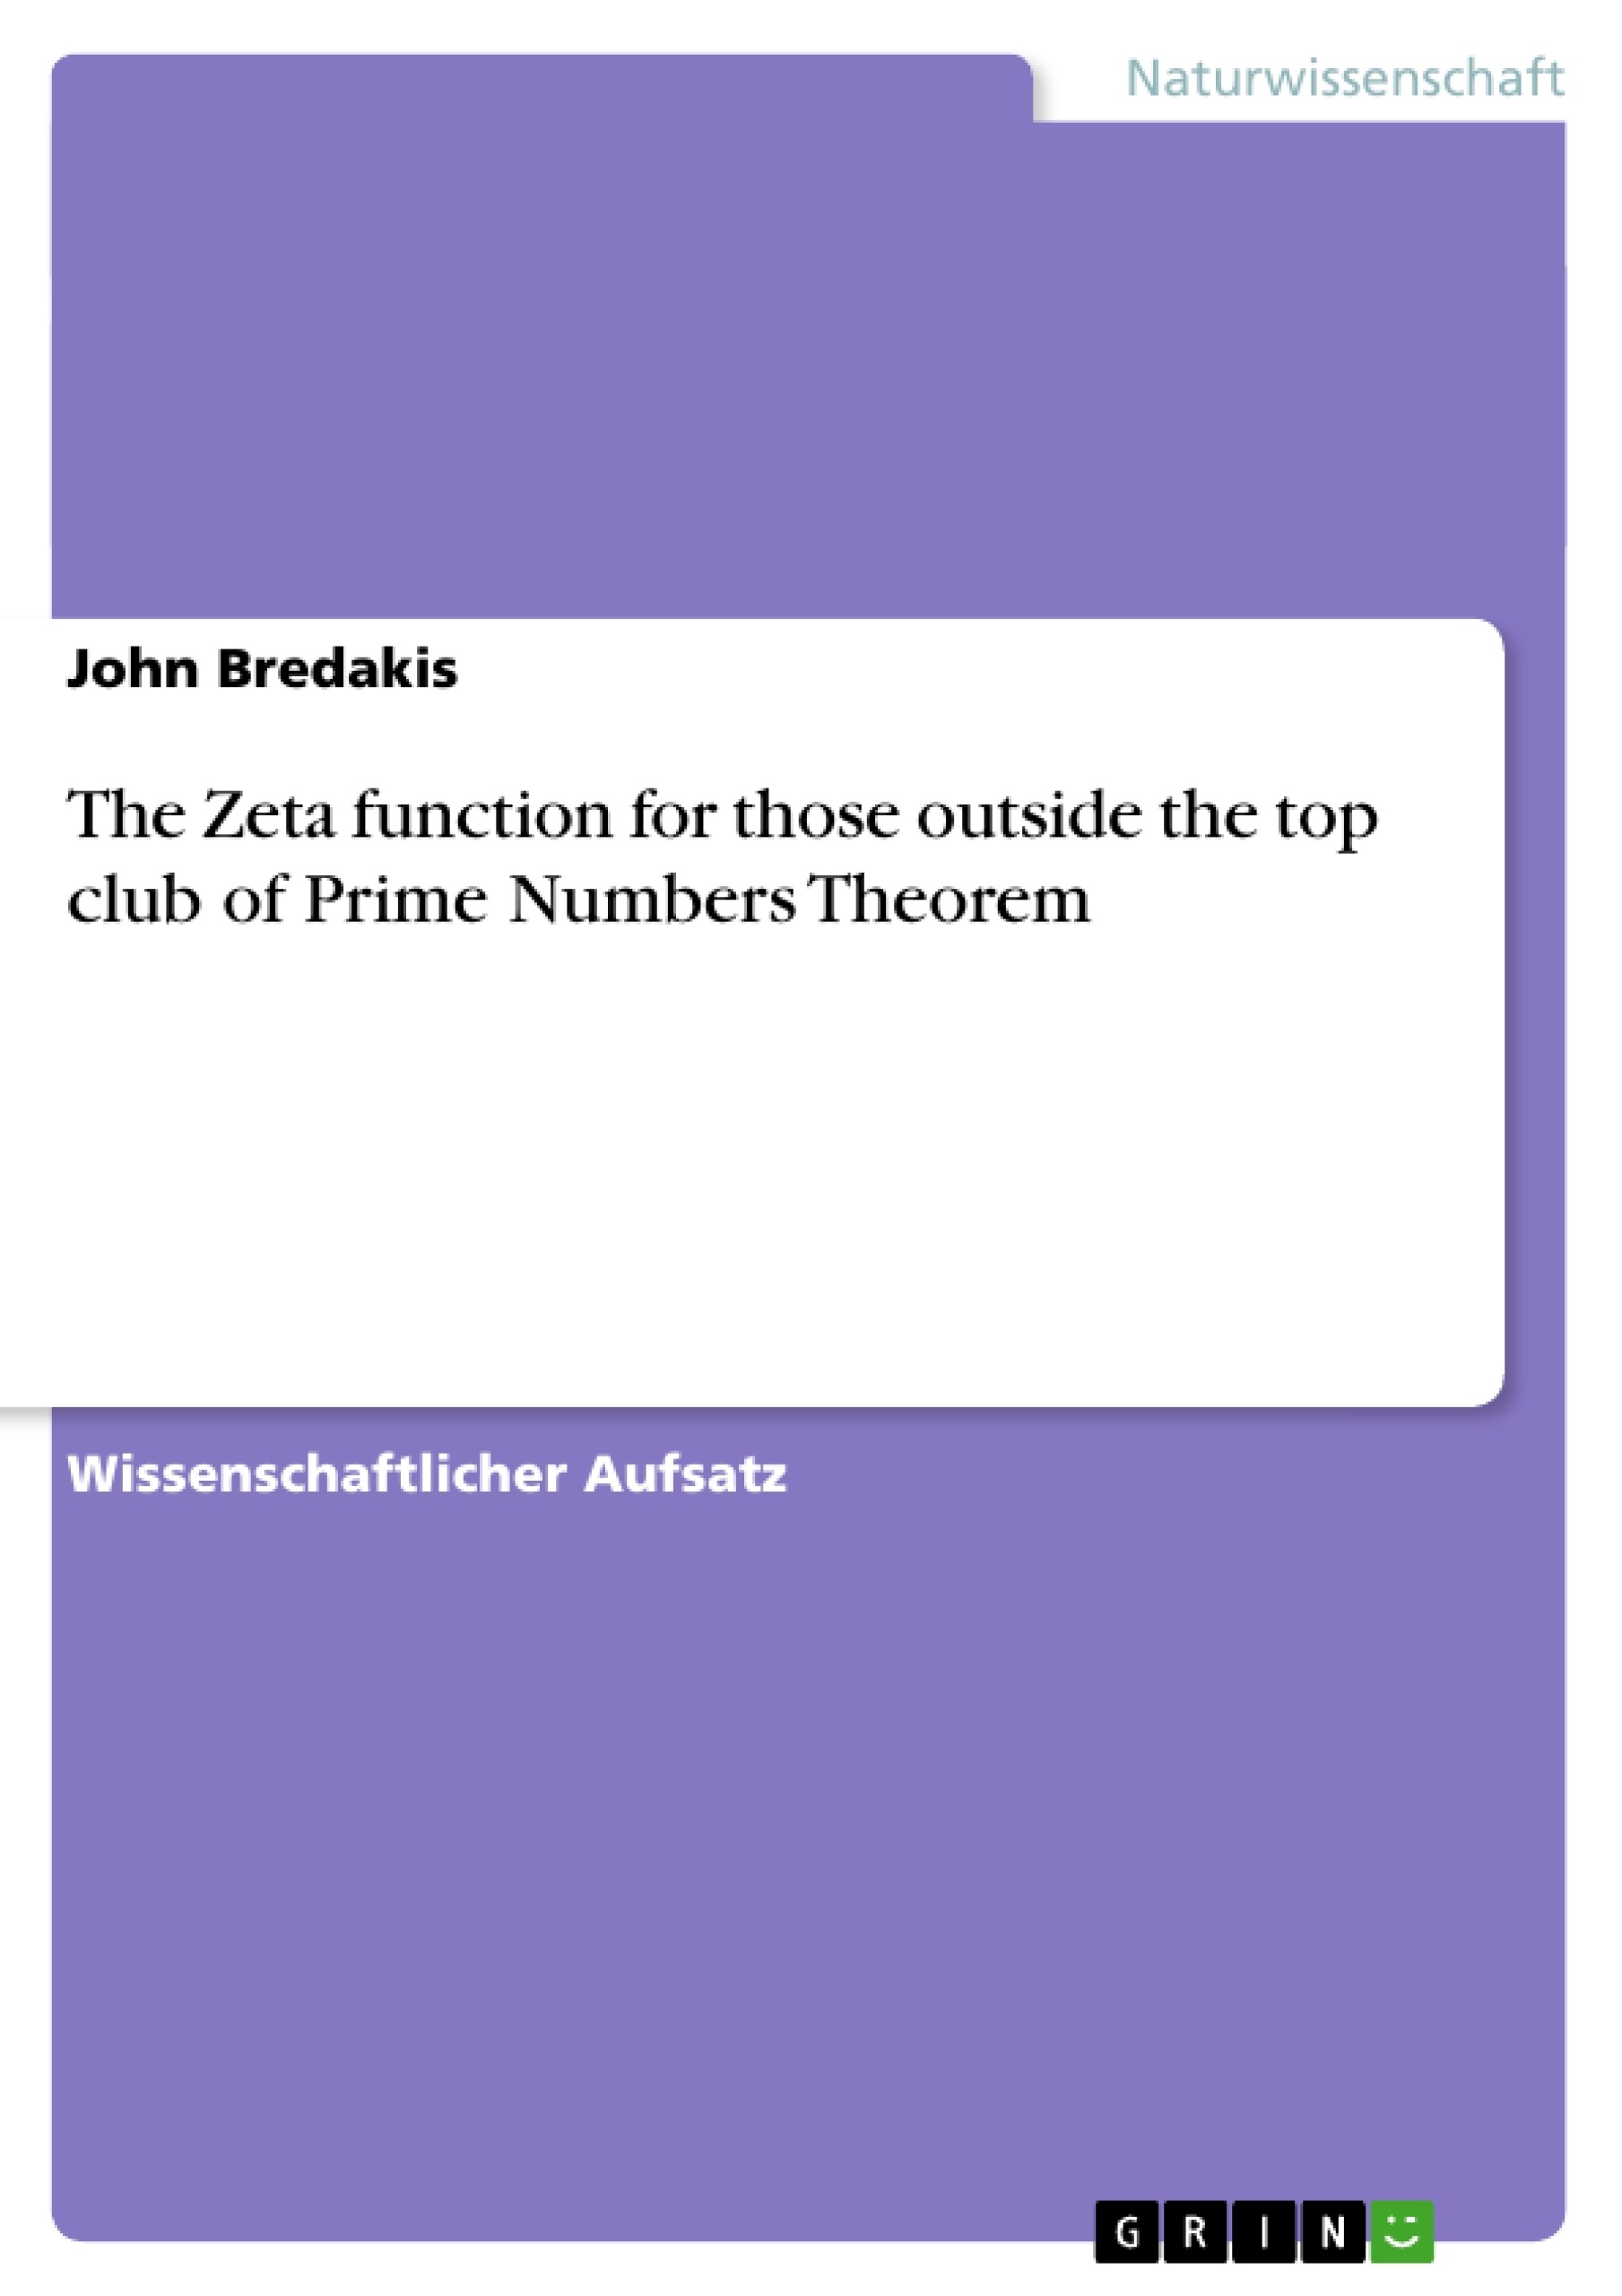 Título: The Zeta function for those outside the top club of Prime Numbers Theorem